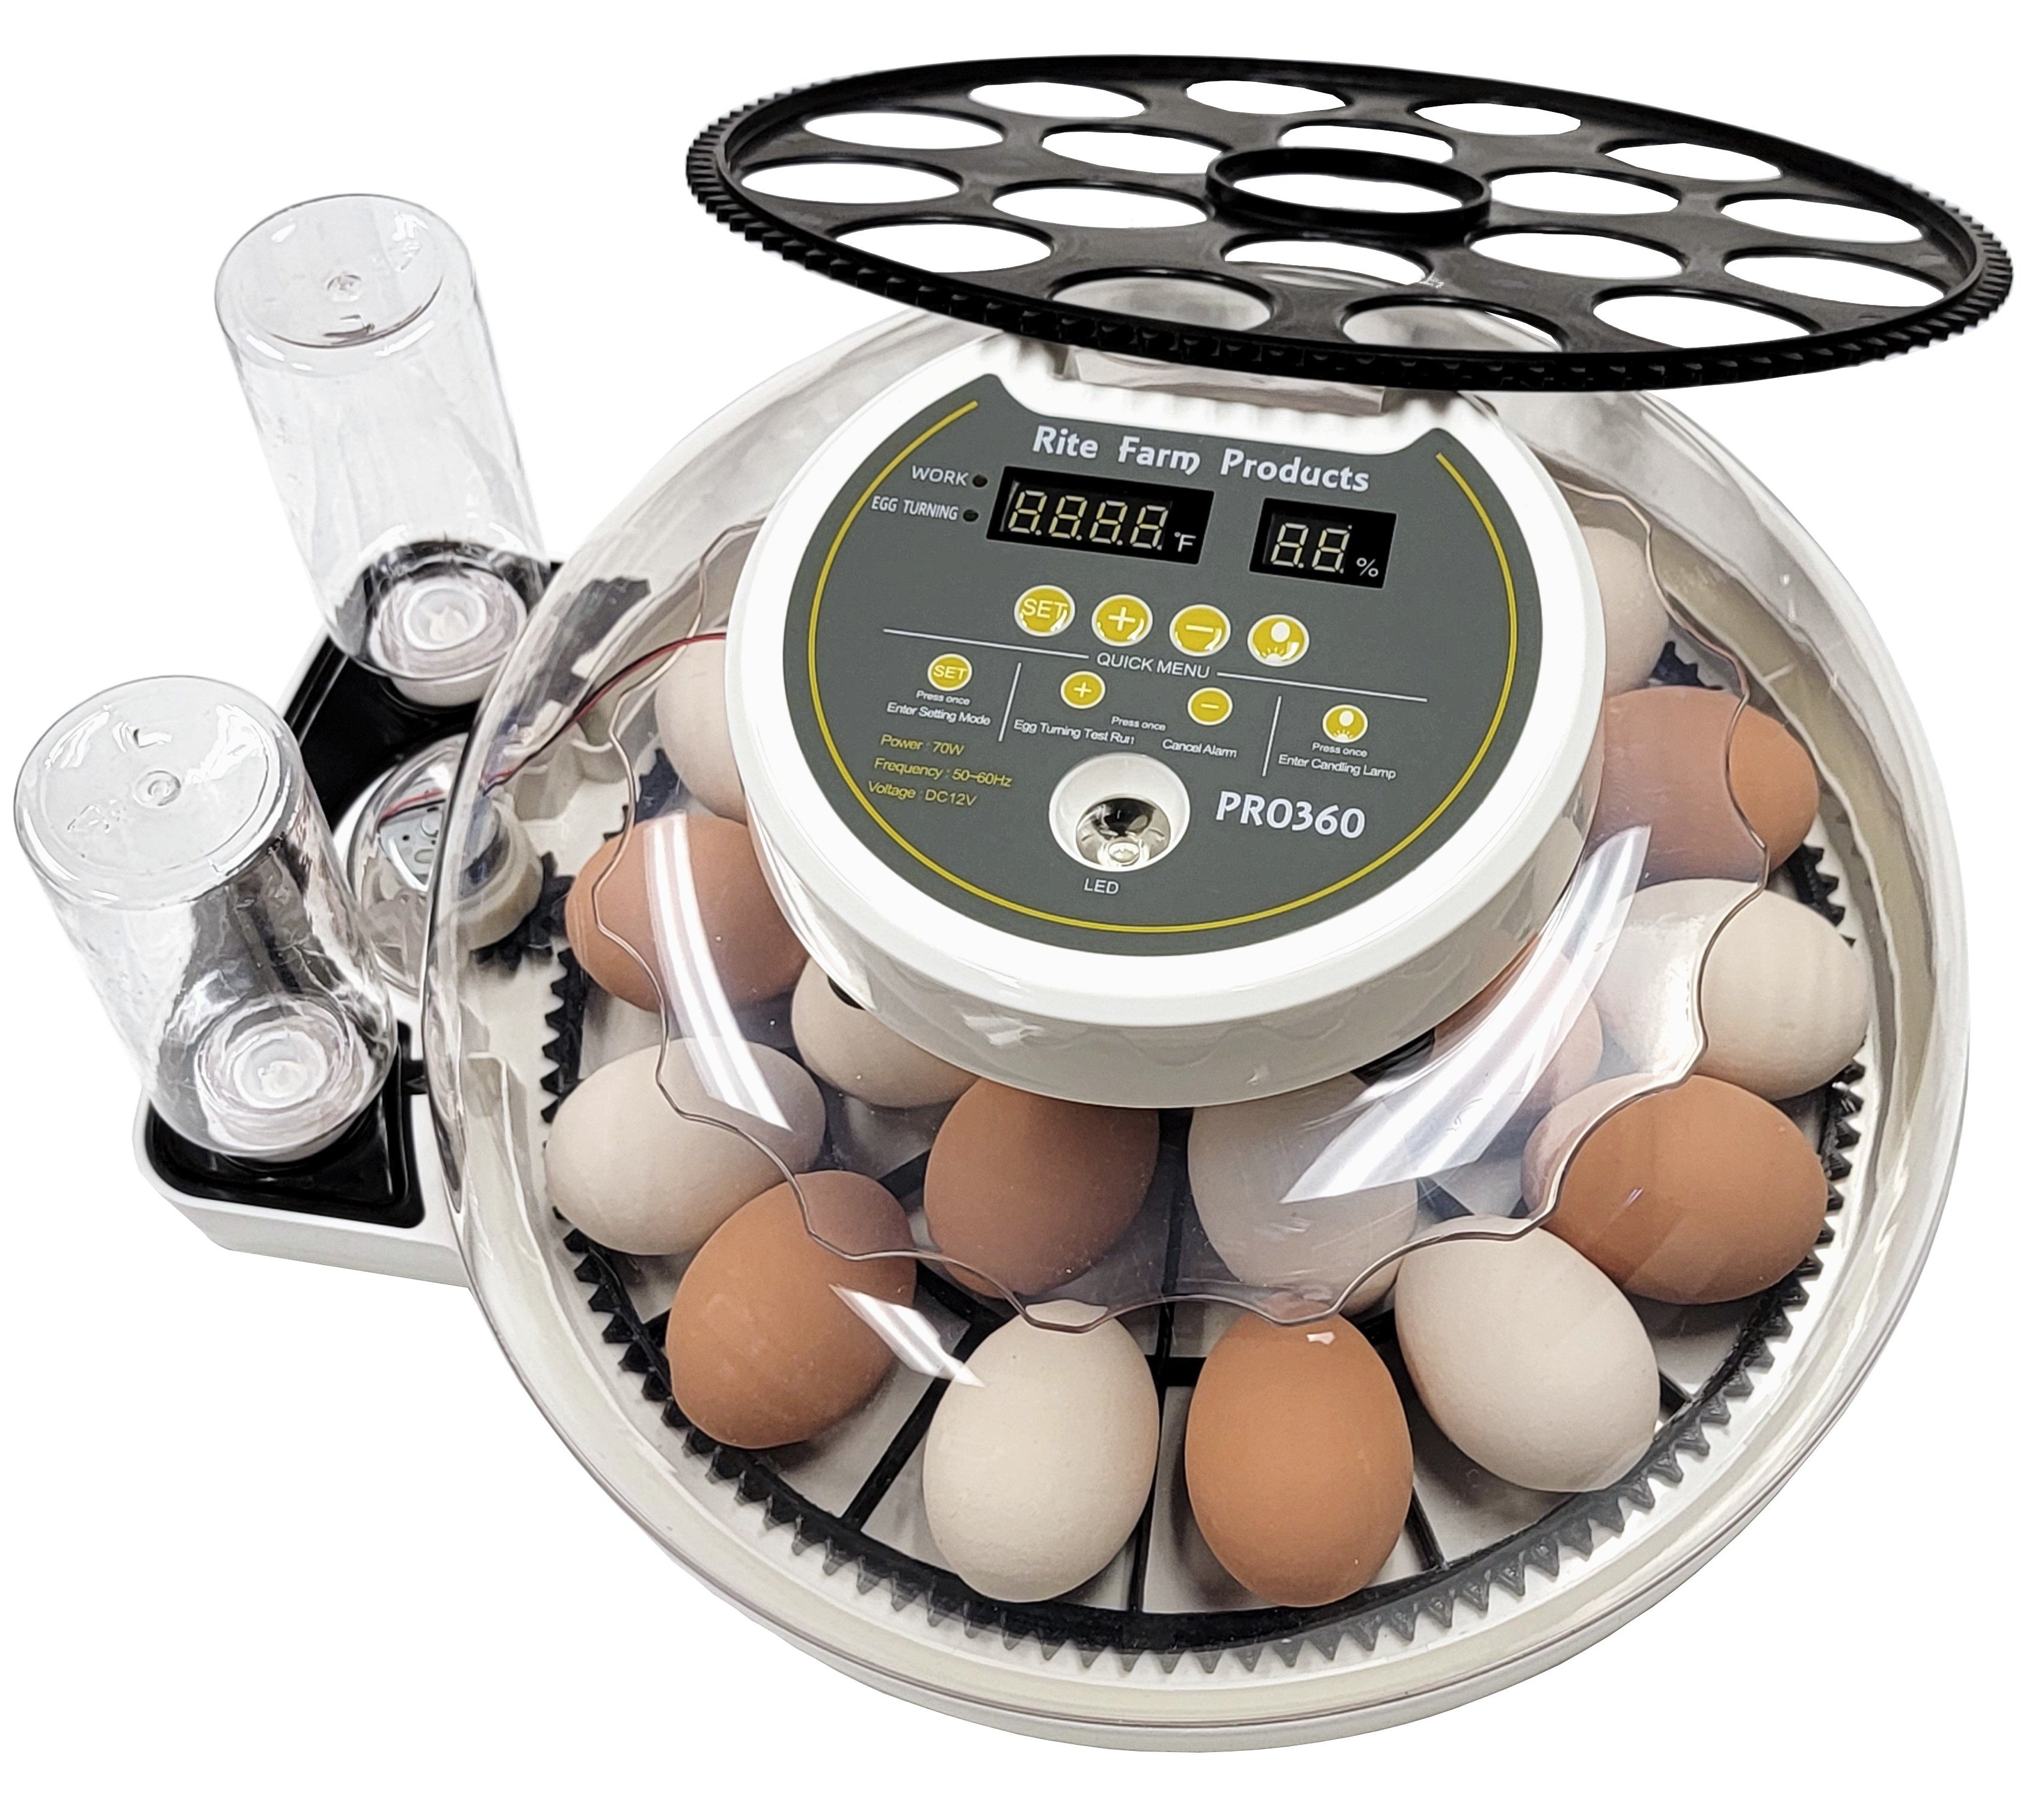 PRO 360 Rite Farm Products 21 Chicken Egg Incubator with 2 Included Egg Turner Trays